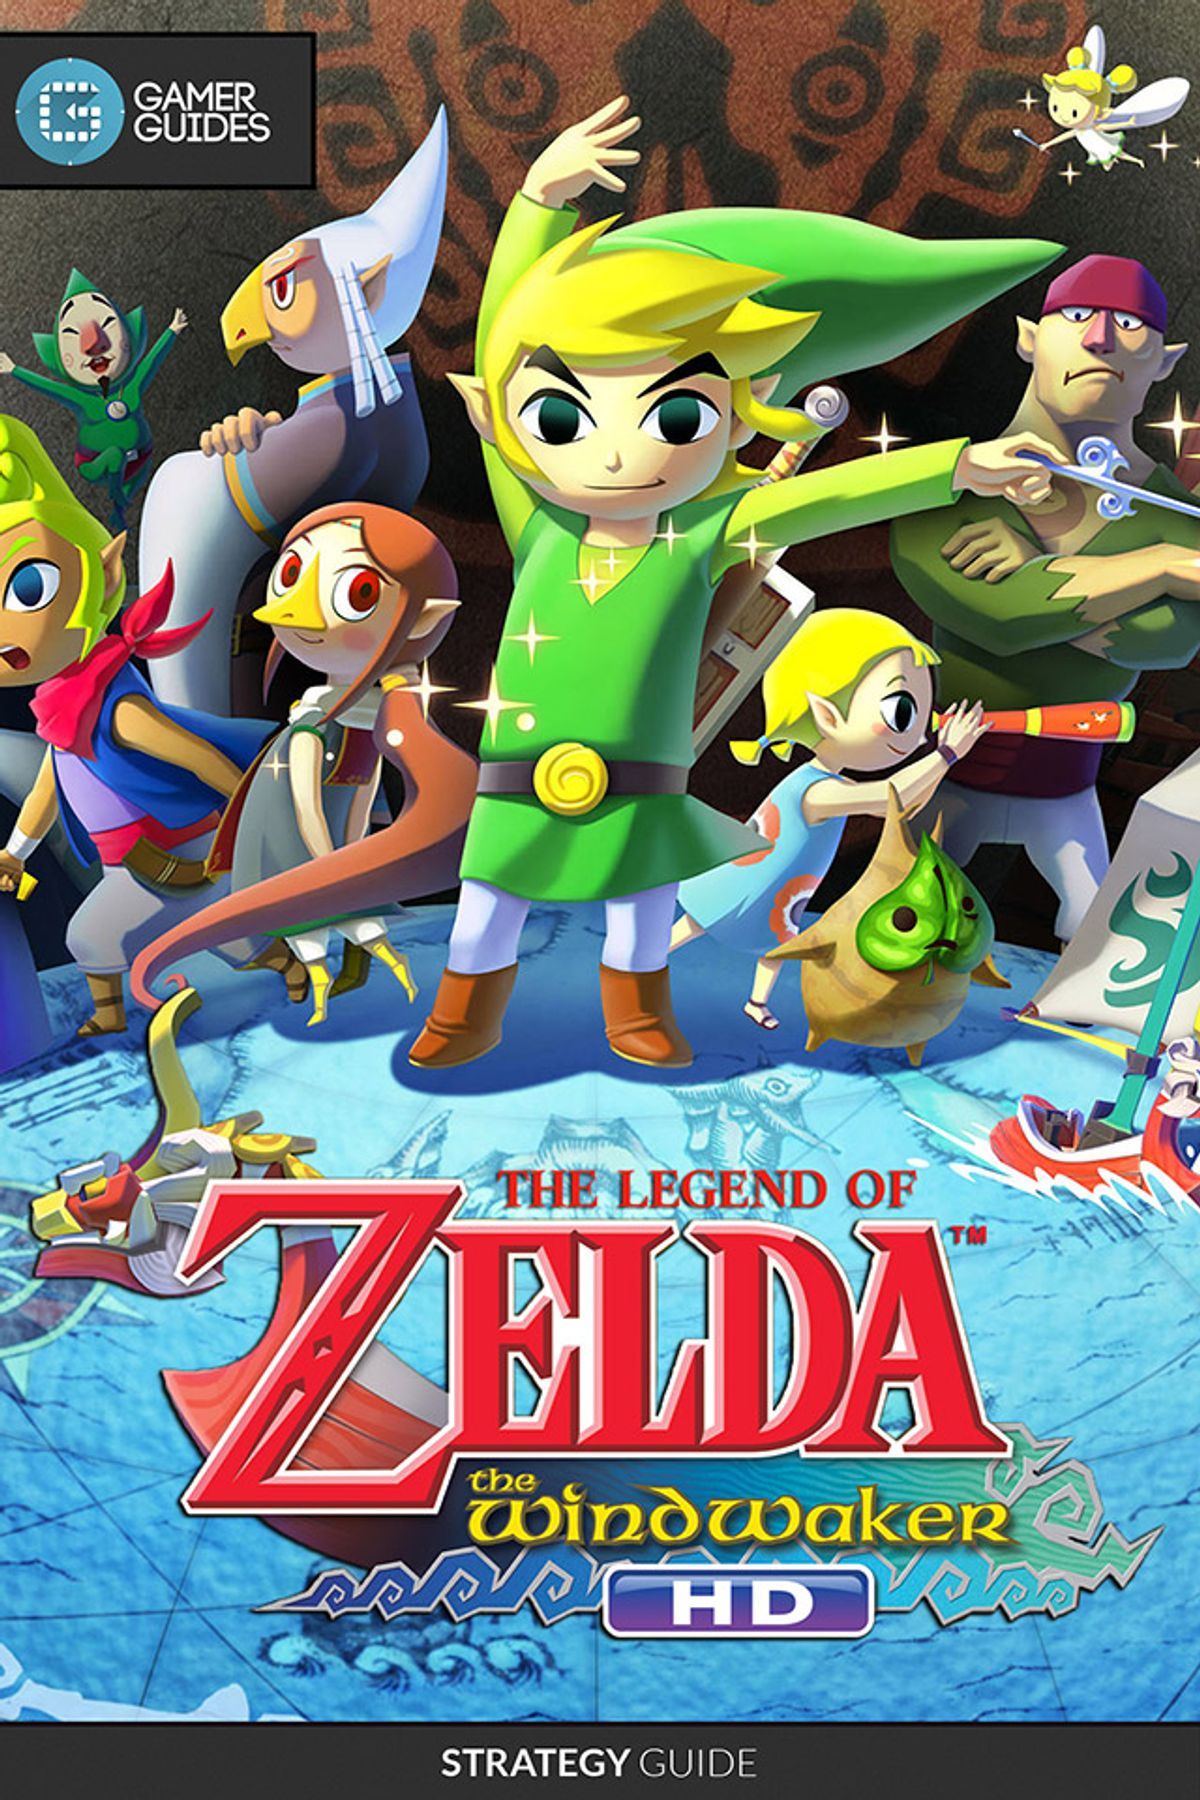 who are the game creators for zelda